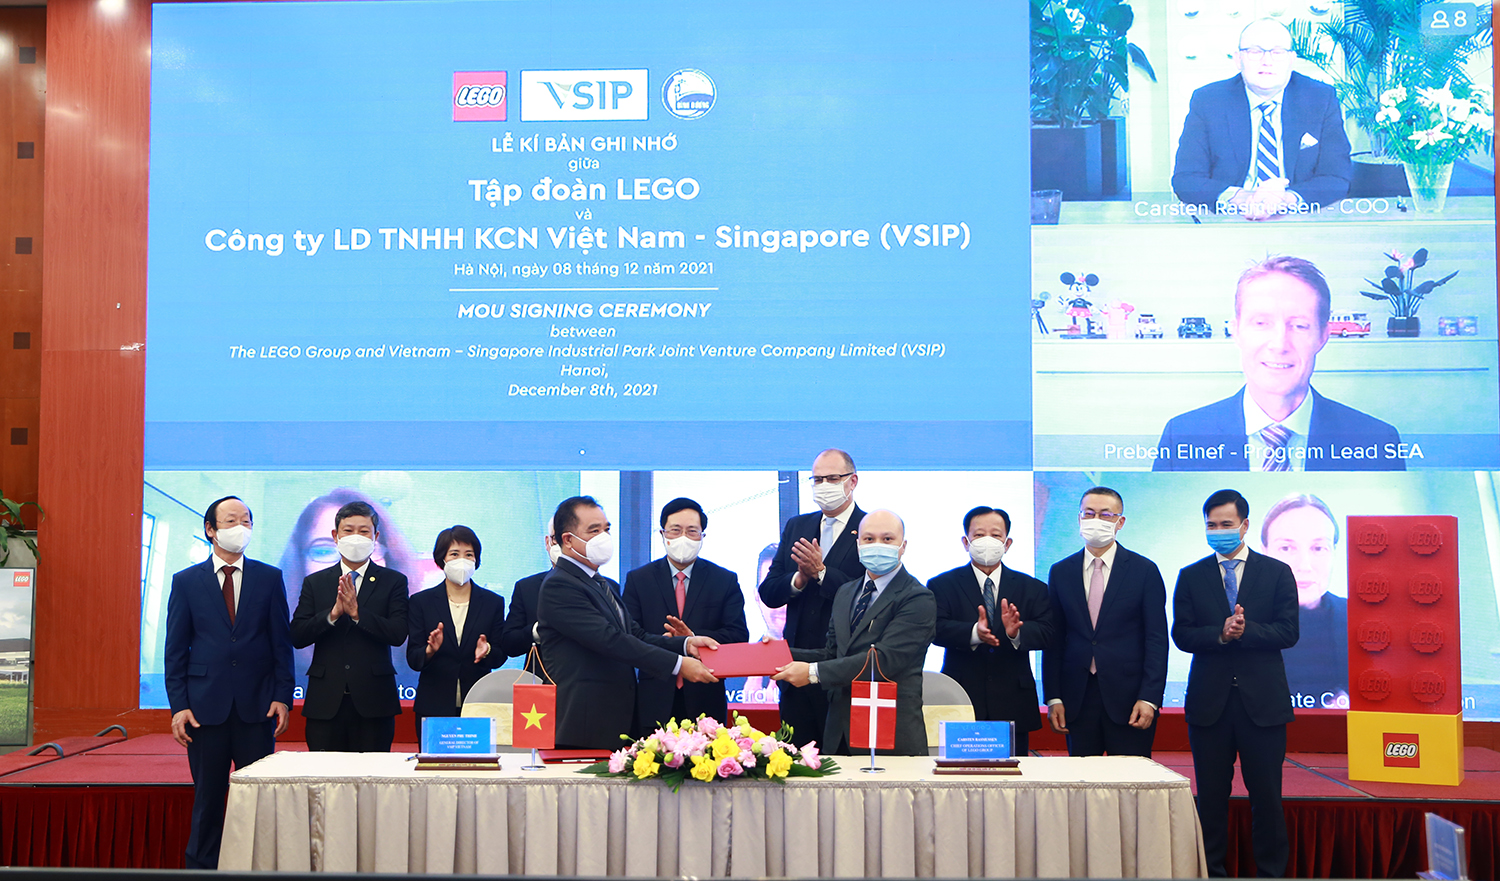 LEGO Group invests 1 billion USD factory in Binh Duong